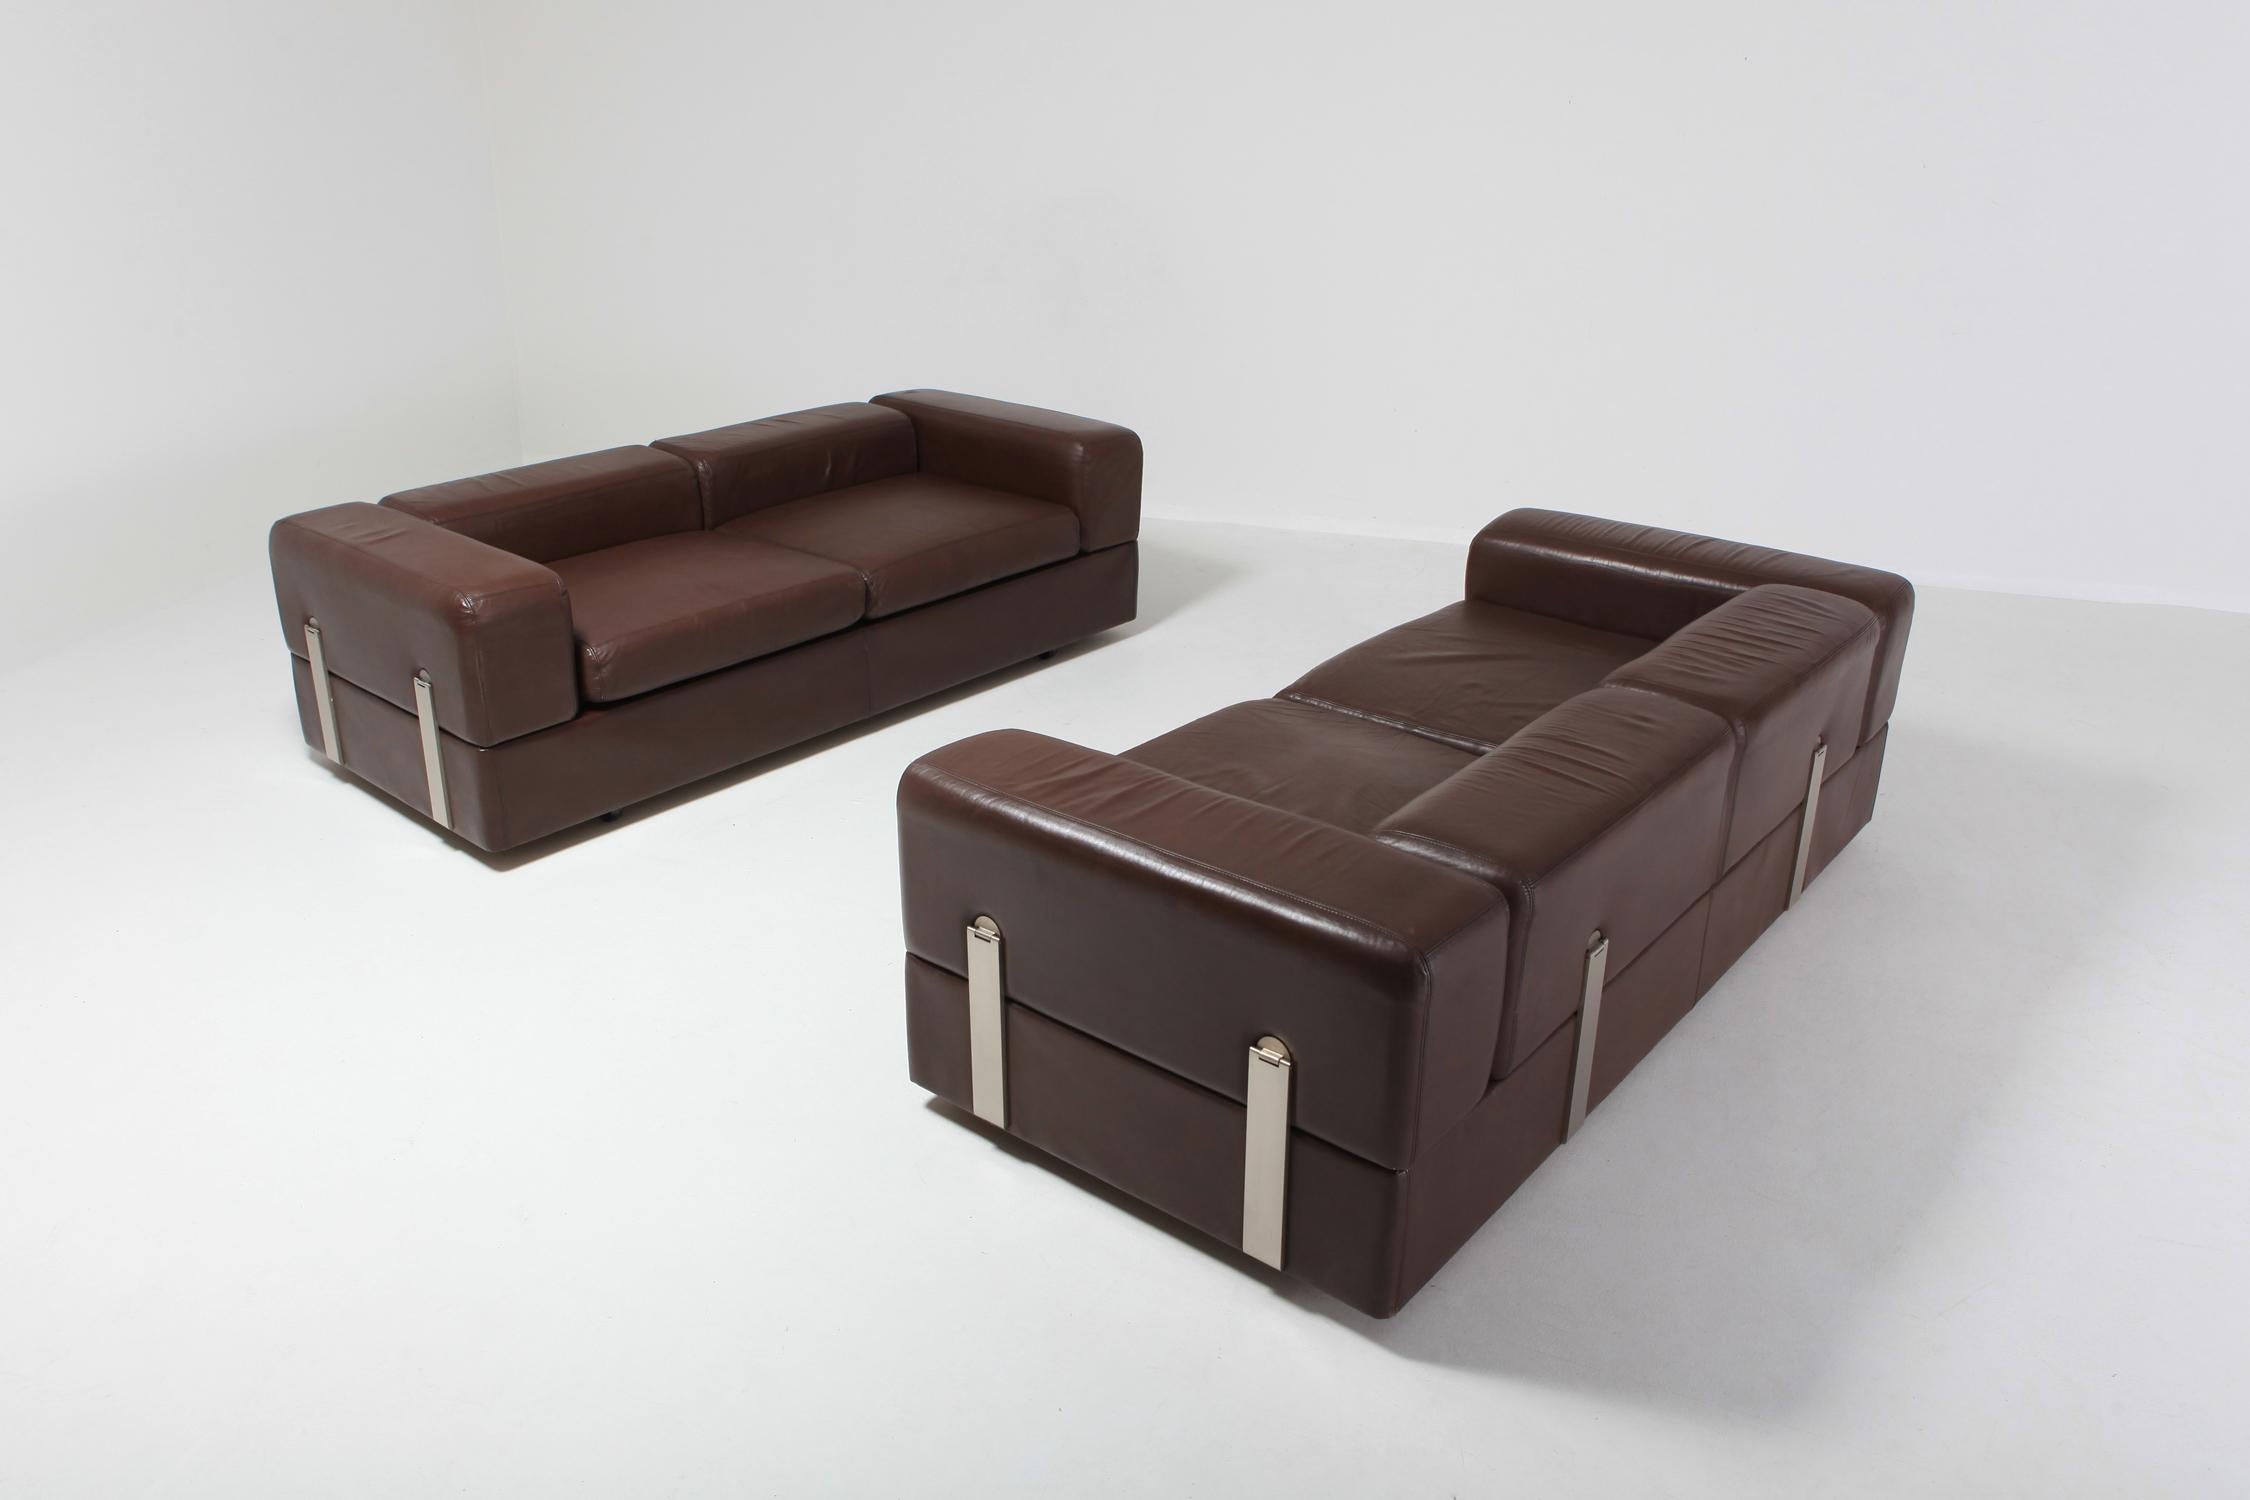 Tito Agnoli for Cinova, sofa bed 711 in brown leather, Italy, 1960s 

Mid-Century Modern Space Age sofa which can be converted in a daybed, designed by Tito Agnoli and manufactured by Cinova. 
A truly stunning design, just look at the stainless